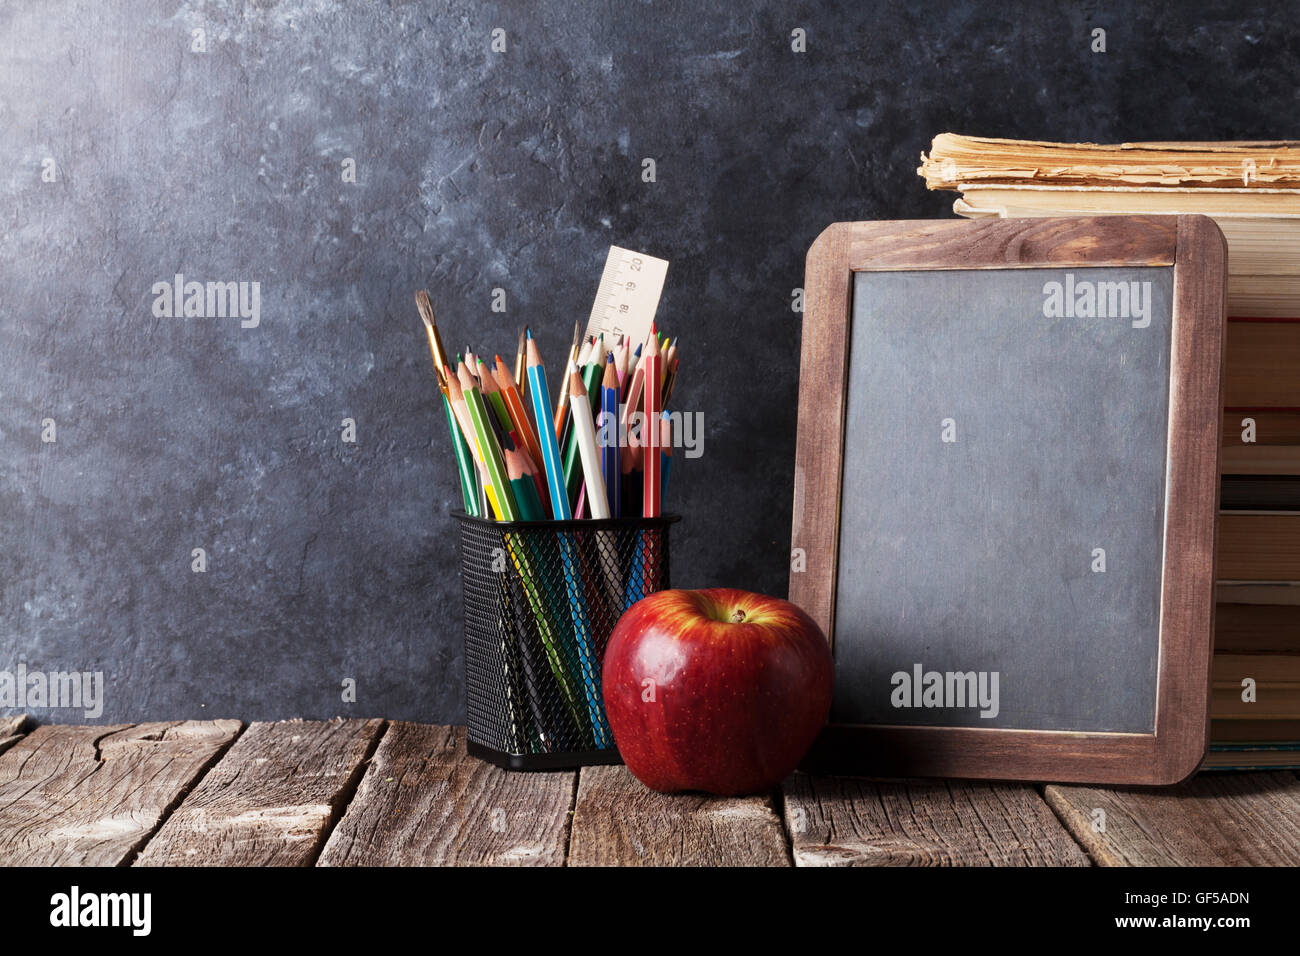 Education or back to school Concept. glasses, pencils, note books, chalk,  eraser over chalkboard background. Stock Photo